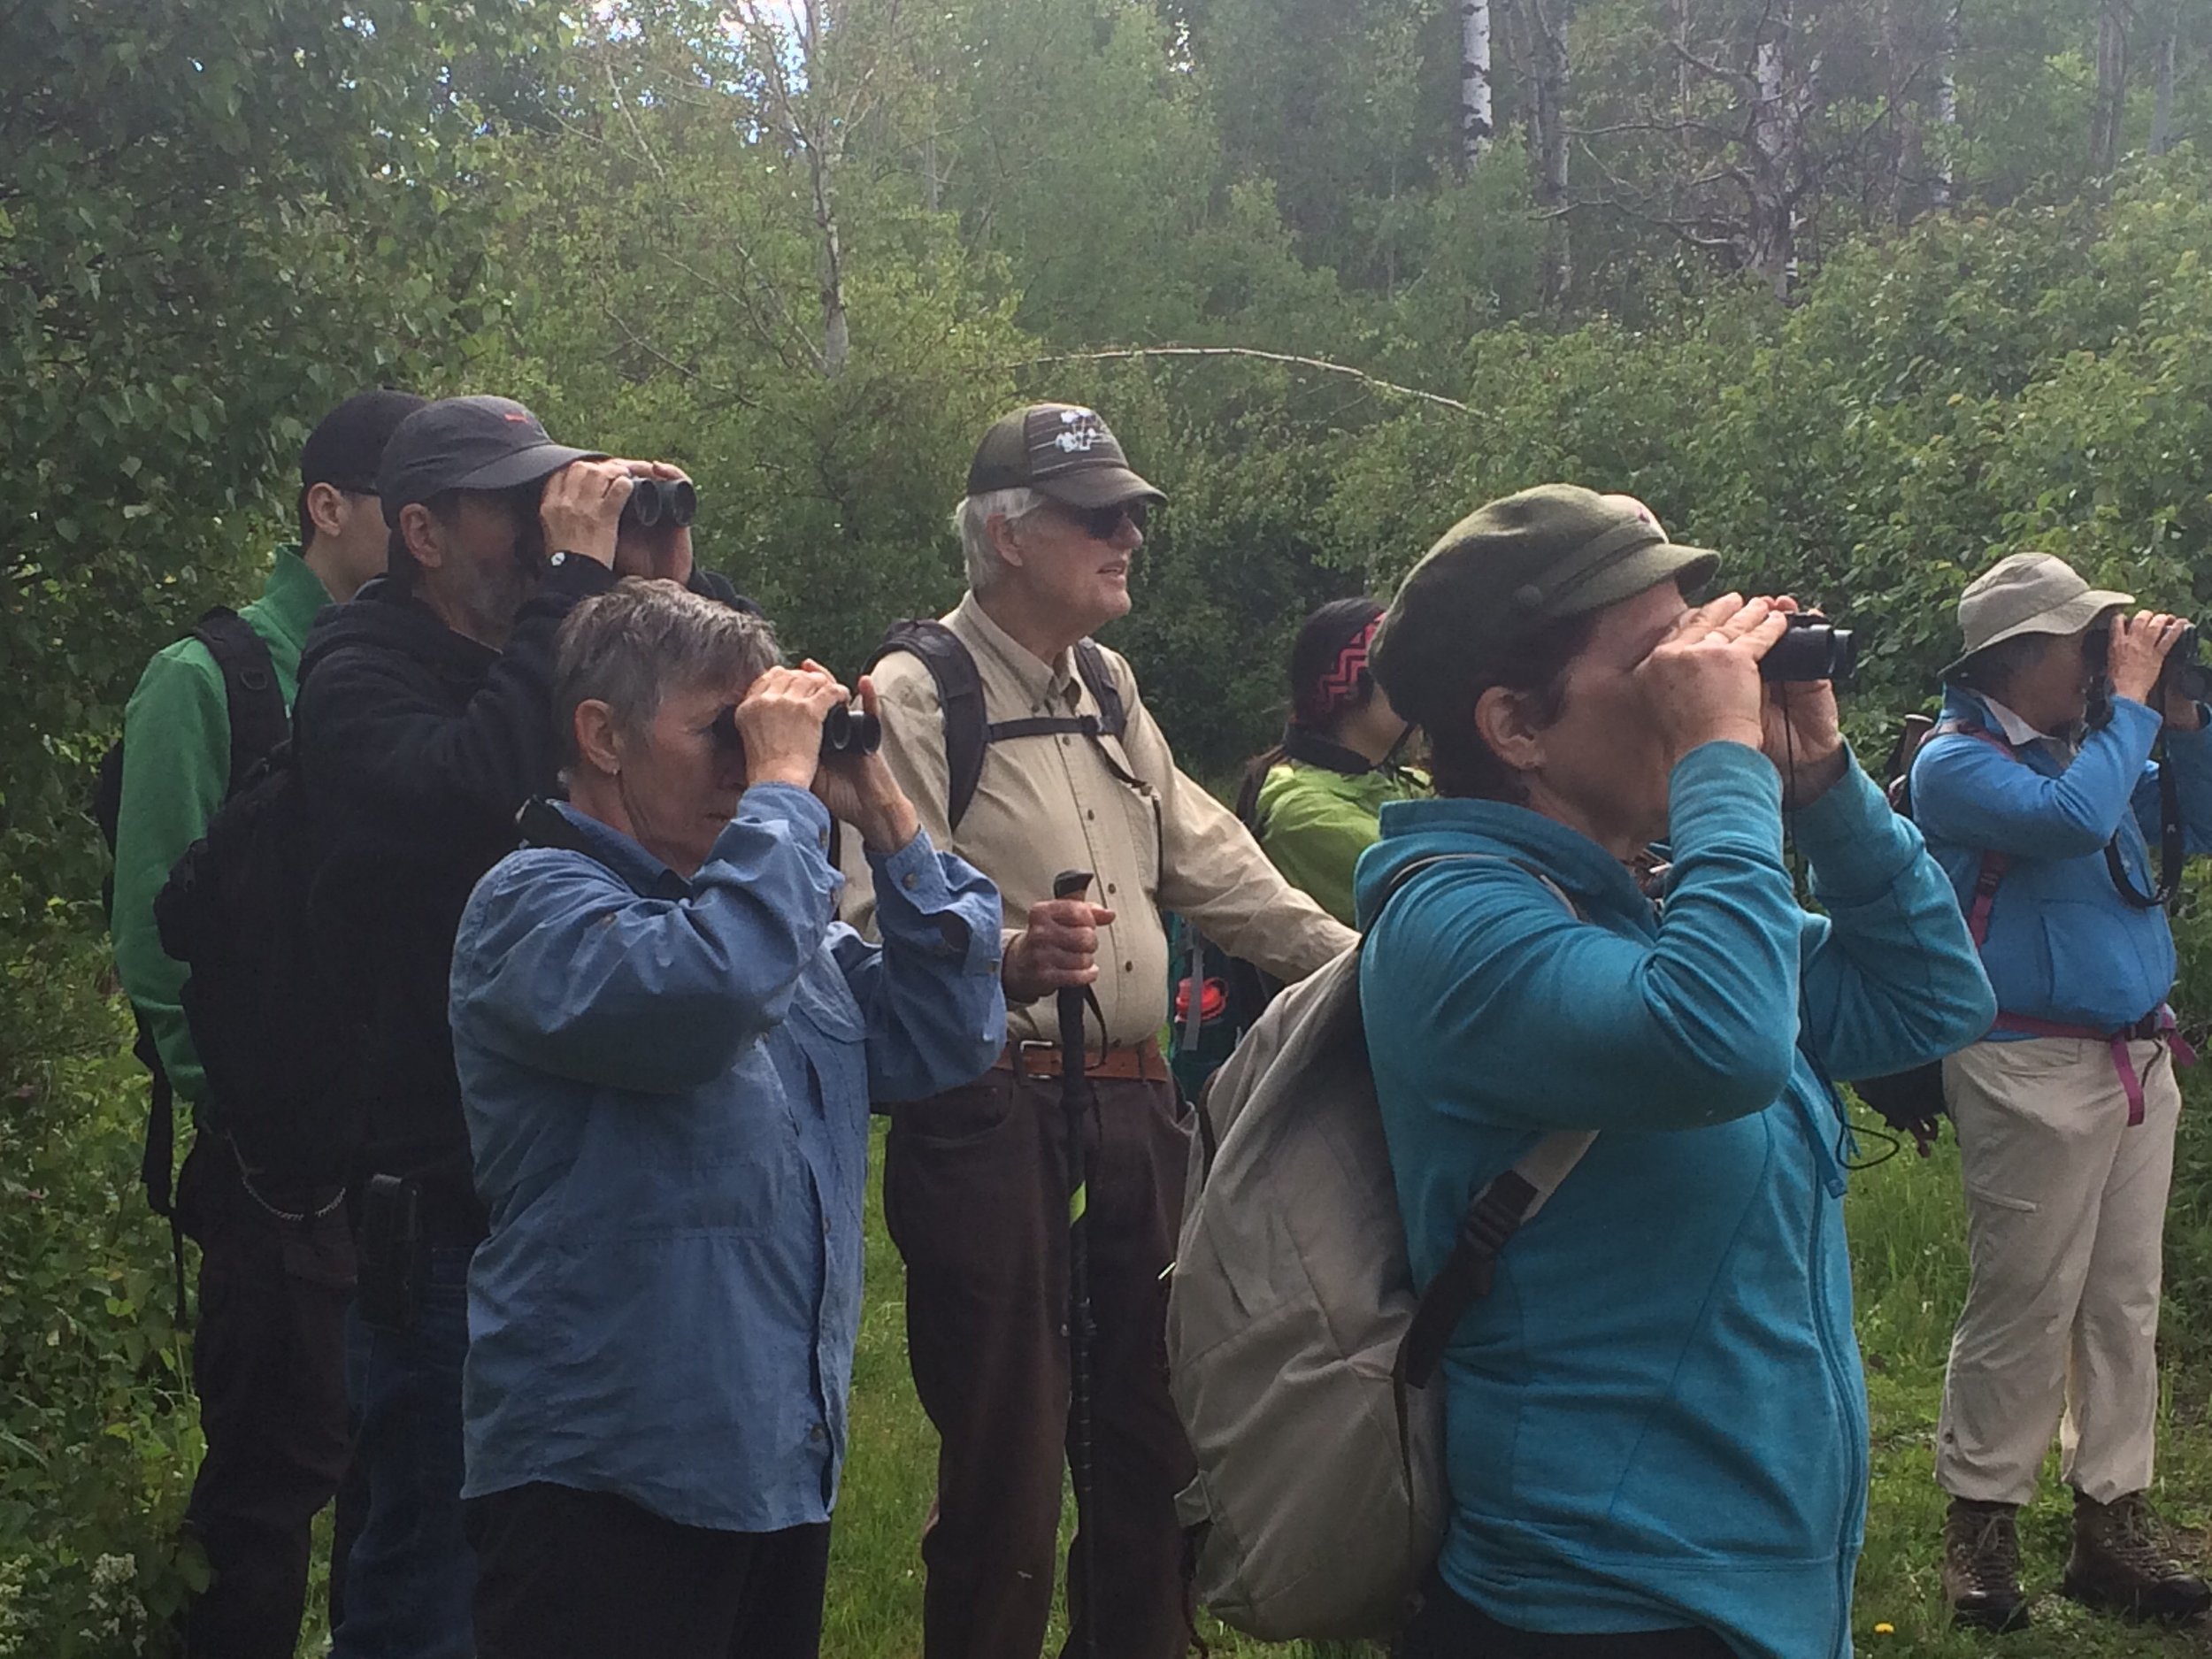 Surveying bird and plant life at Lu Carbyn Nature Sanctuary